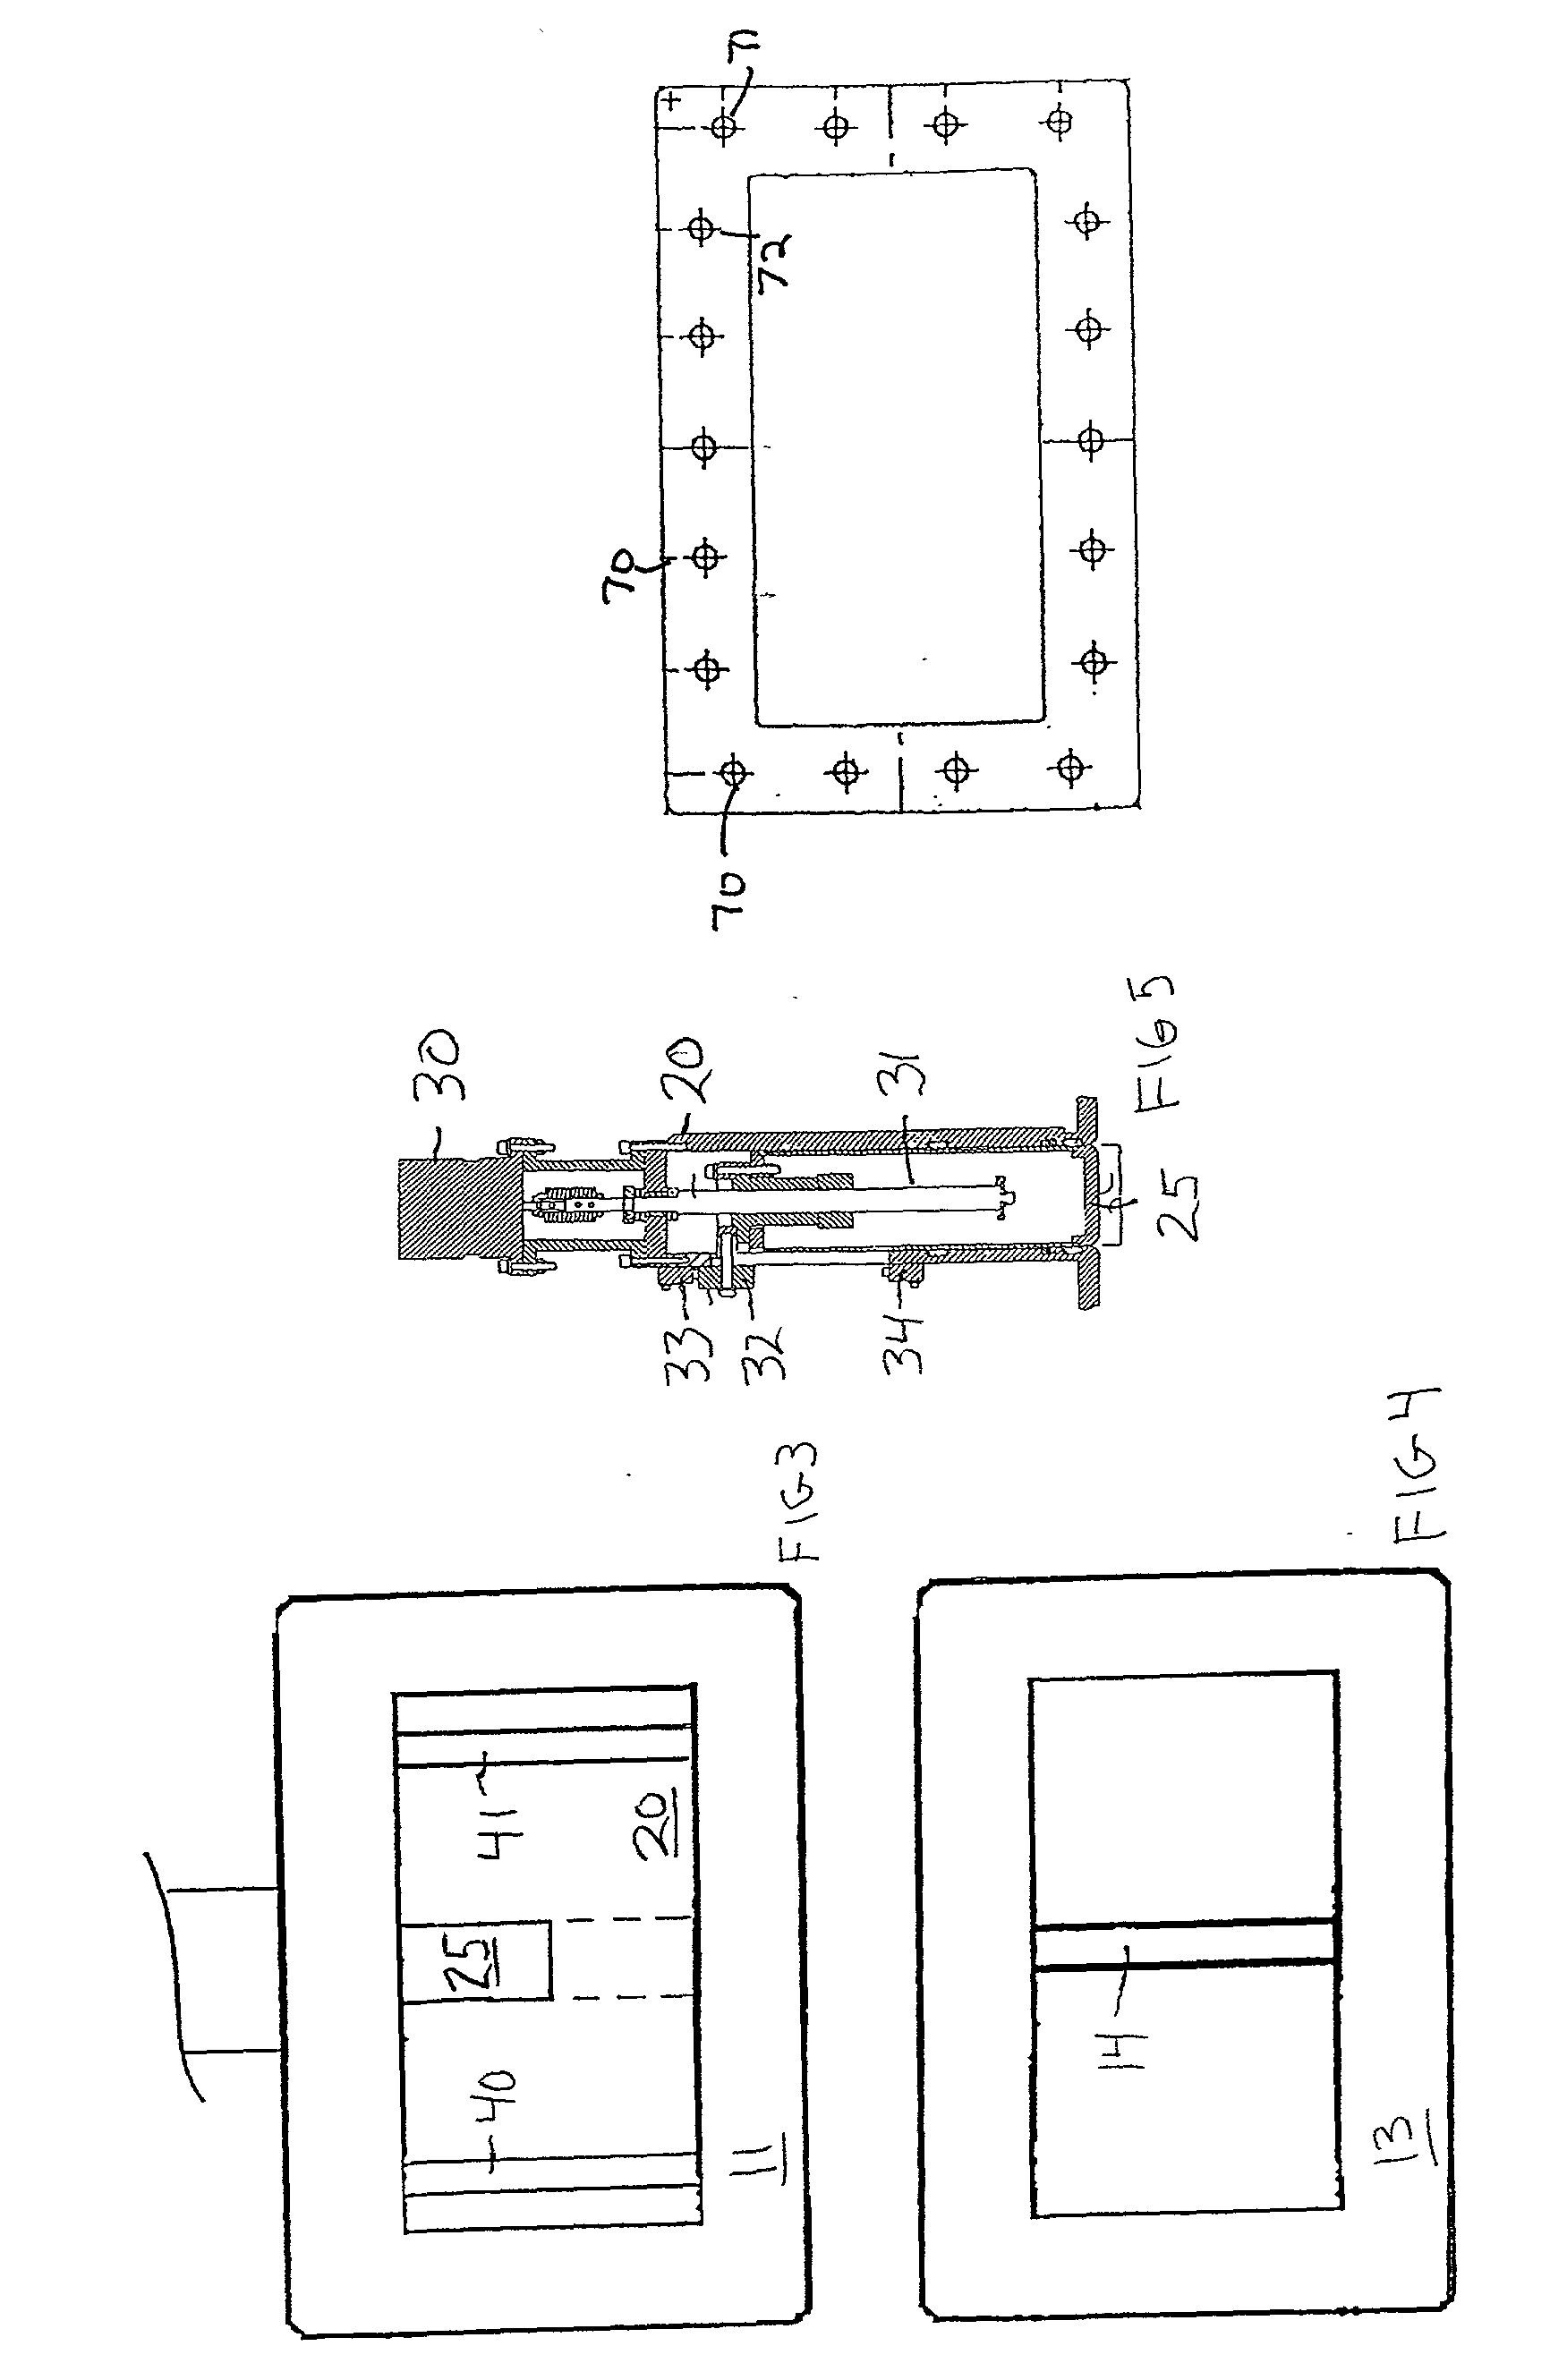 Apparatus and method for in-process high power variable power division